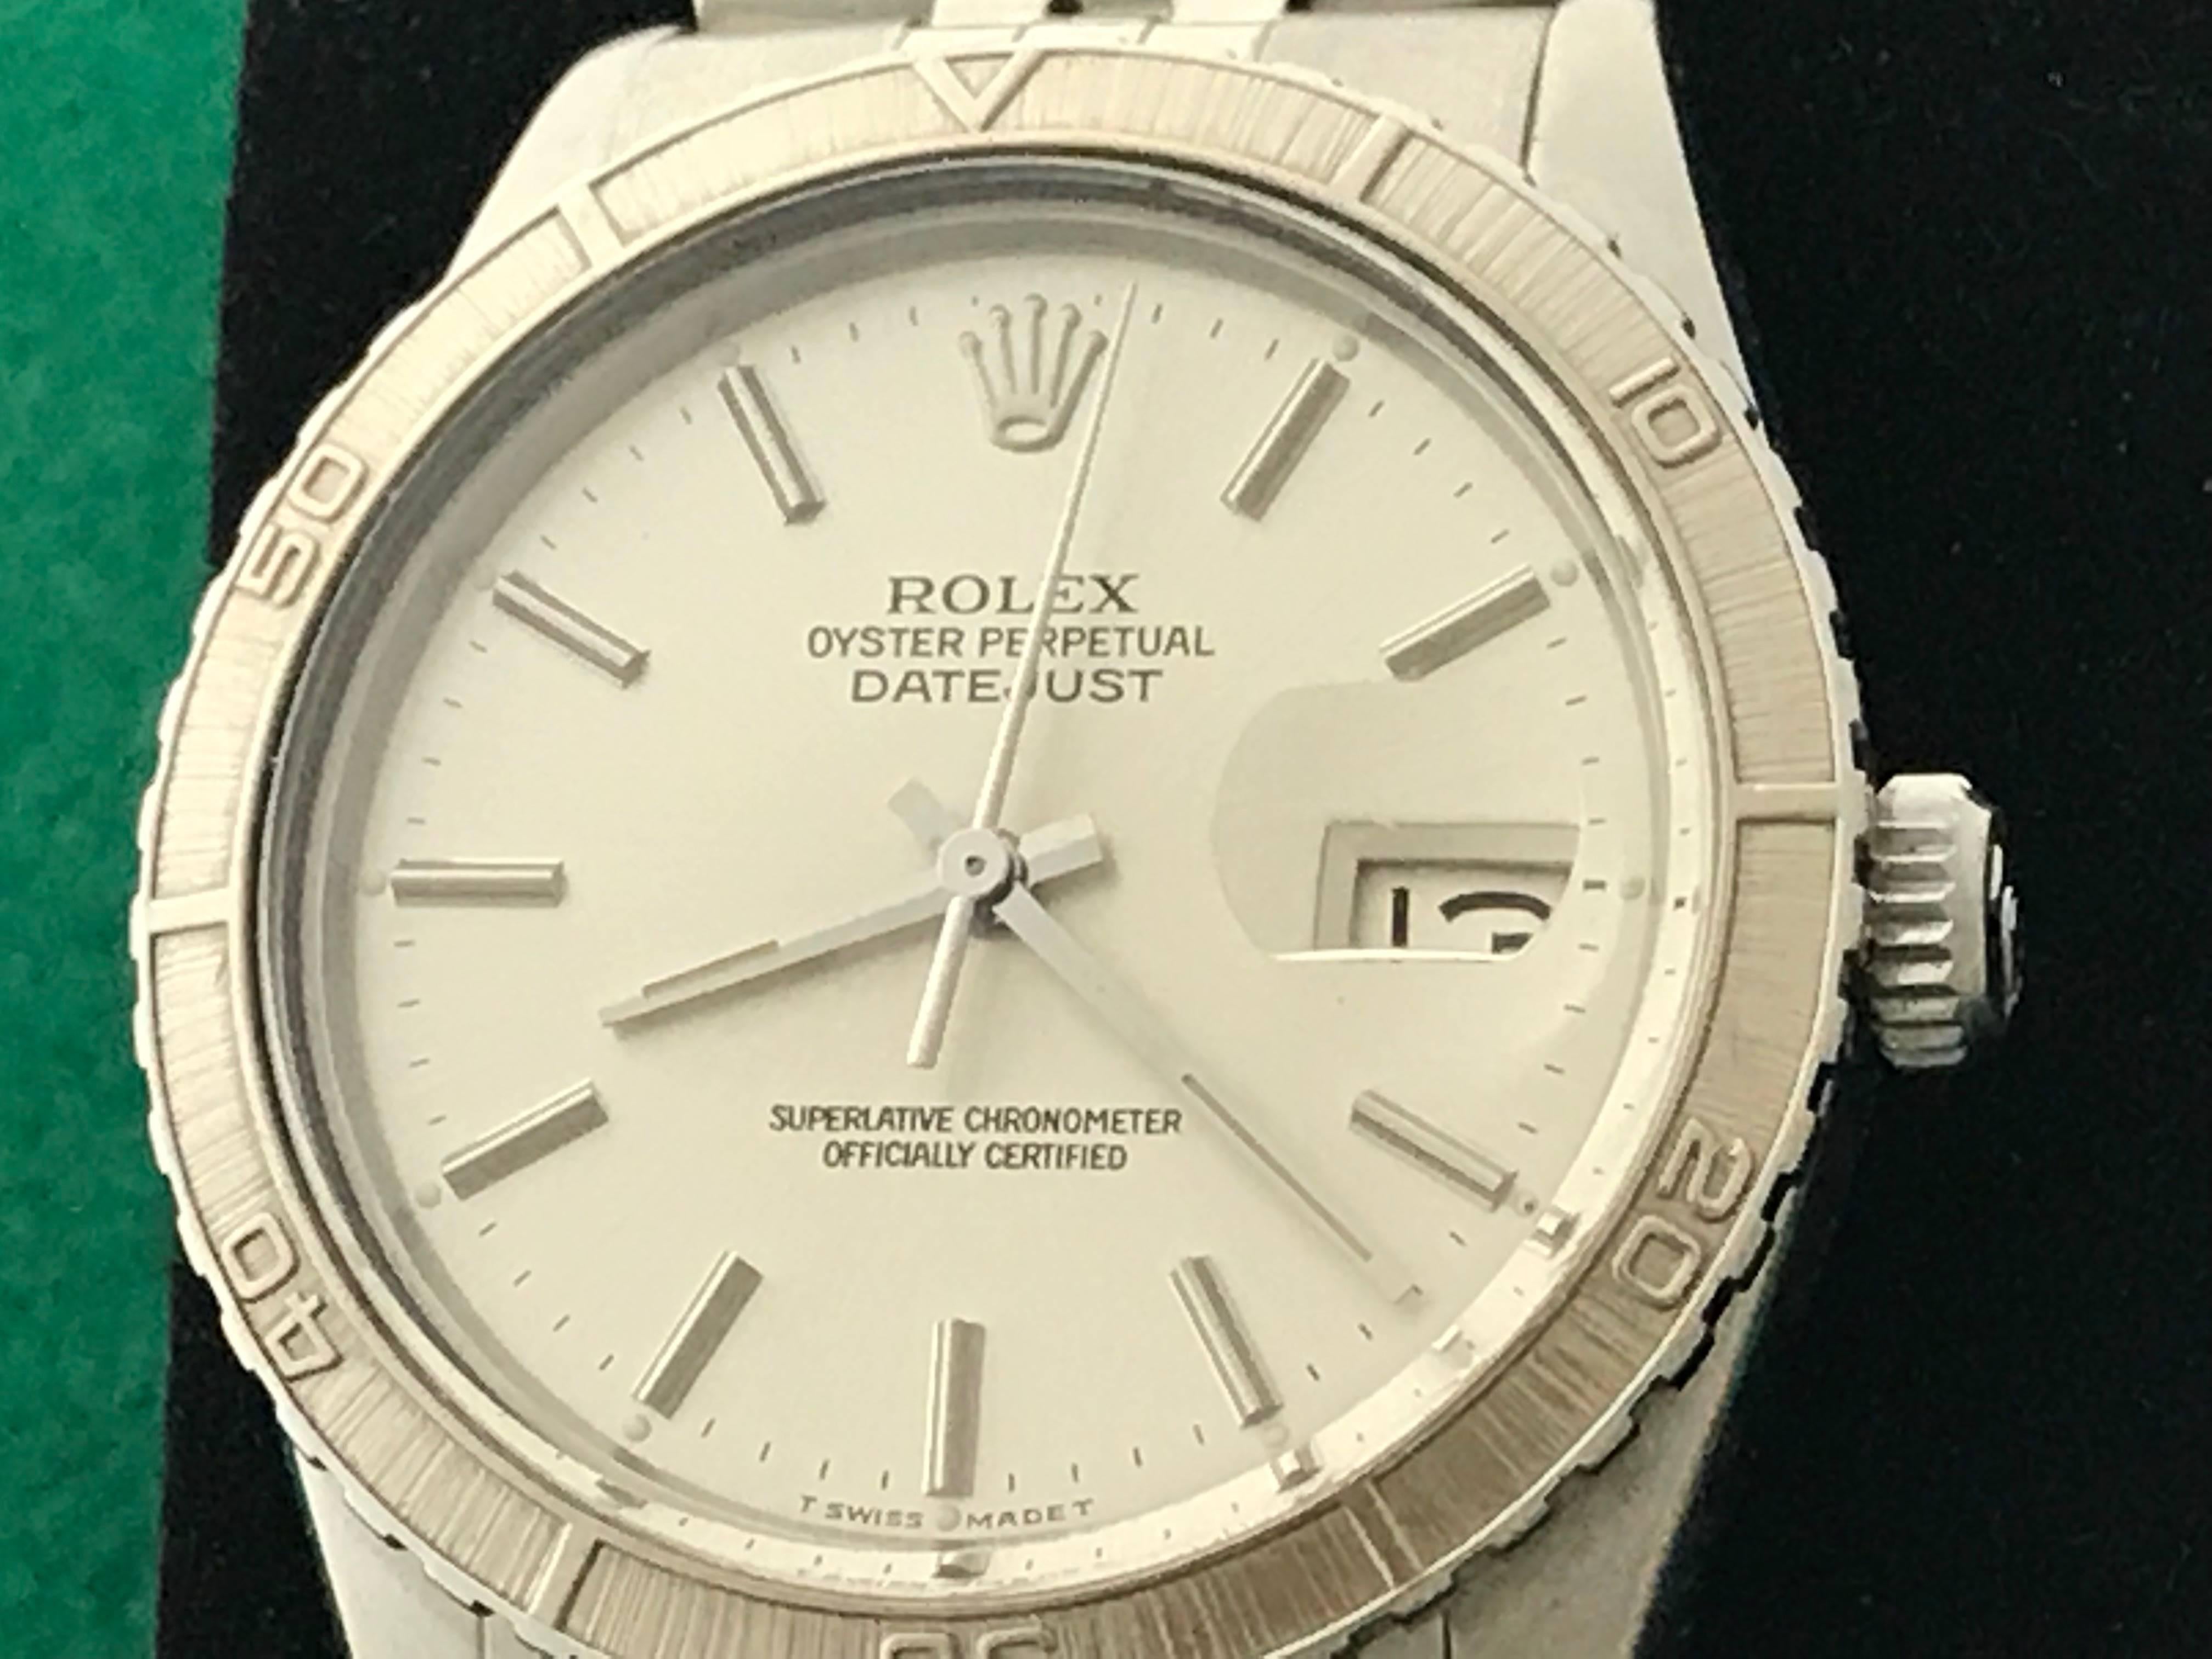 The Rolex Datejust Model 16250 pre-owned men's automatic wrist watch. Certified pre-owned and ready to ship.  Featuring an oyster silver dial with polished hour markers and stainless steel case with 18k white gold Thunderbird bezel. Measures 36mm.